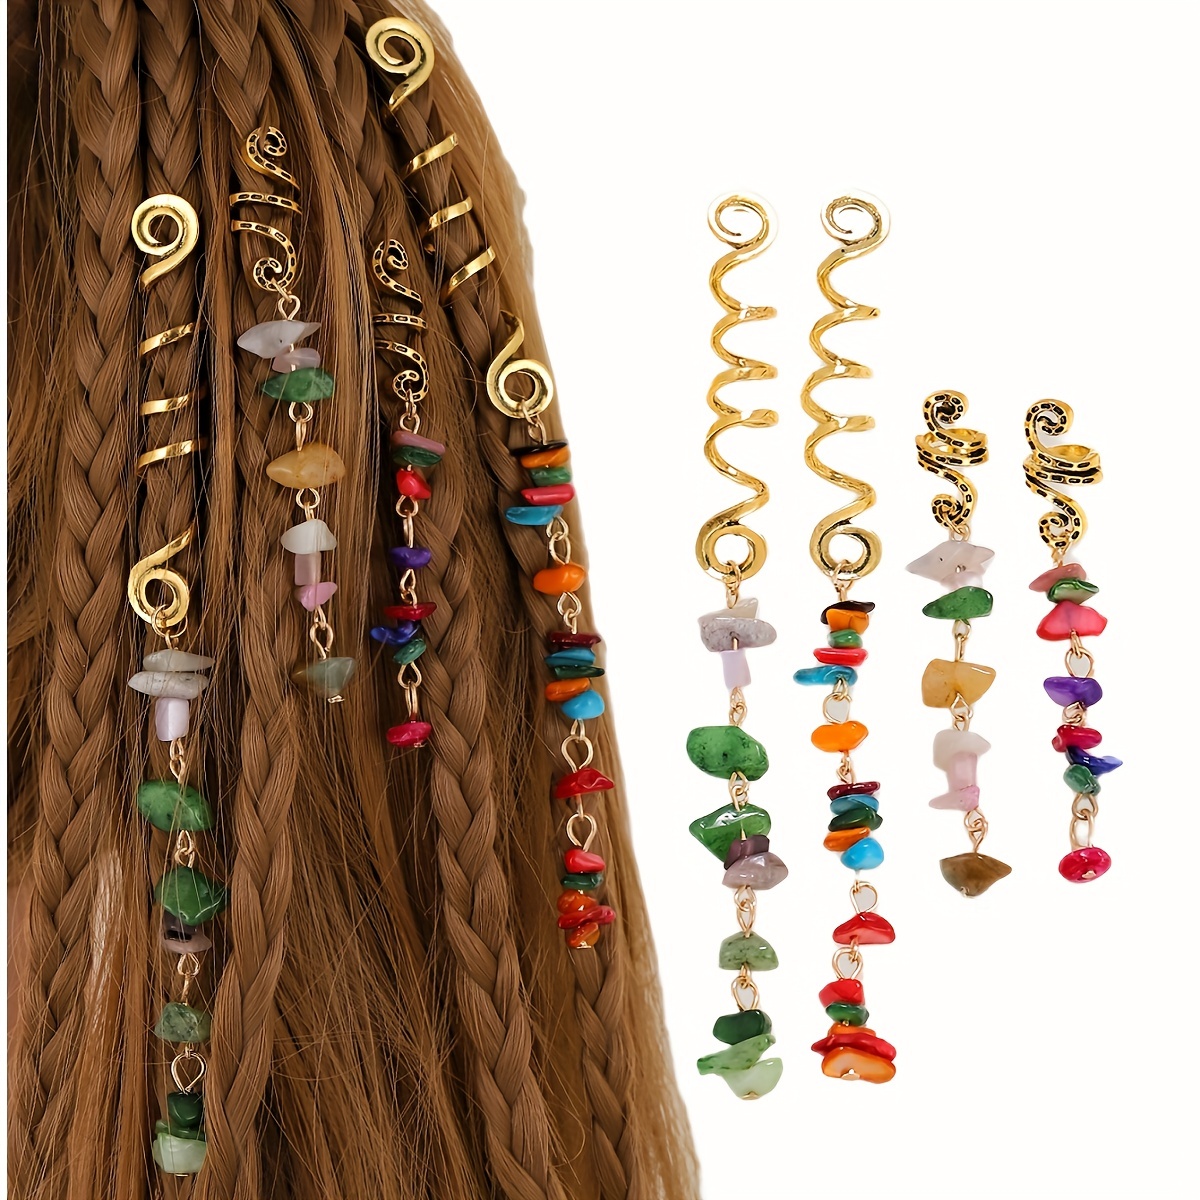 12 Pieces Colored Natural Stone Pendant Hair Jewelry for Braids Crystal  Dreadlock Accessories Hair Gems Metal